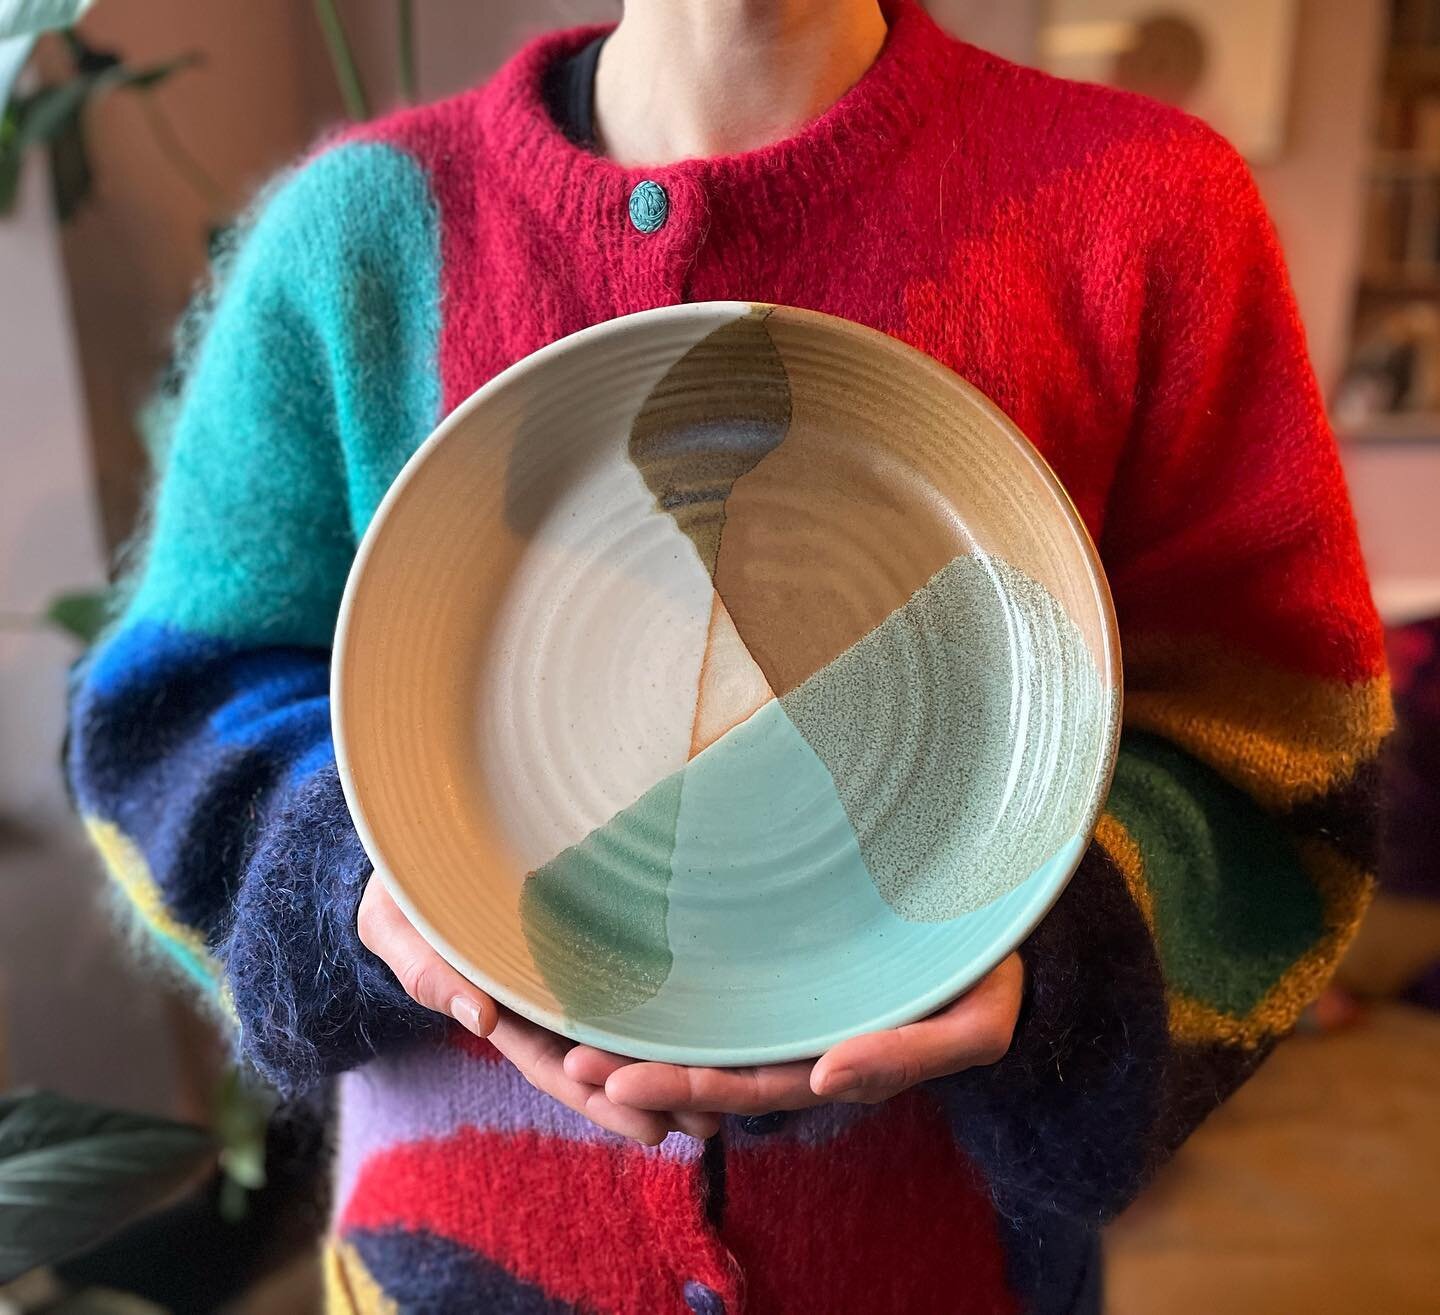 A few more pots in my shop, link in bio 🎄 

Top cardigan / model @roomforapony ❤️

#inthestudio 
#modernceramics #inthestudio 
#potterylife #womeninceramics #studiopottery #potterylove #rustichome #simpleandstill #allthebeautifulthings #handmadecera